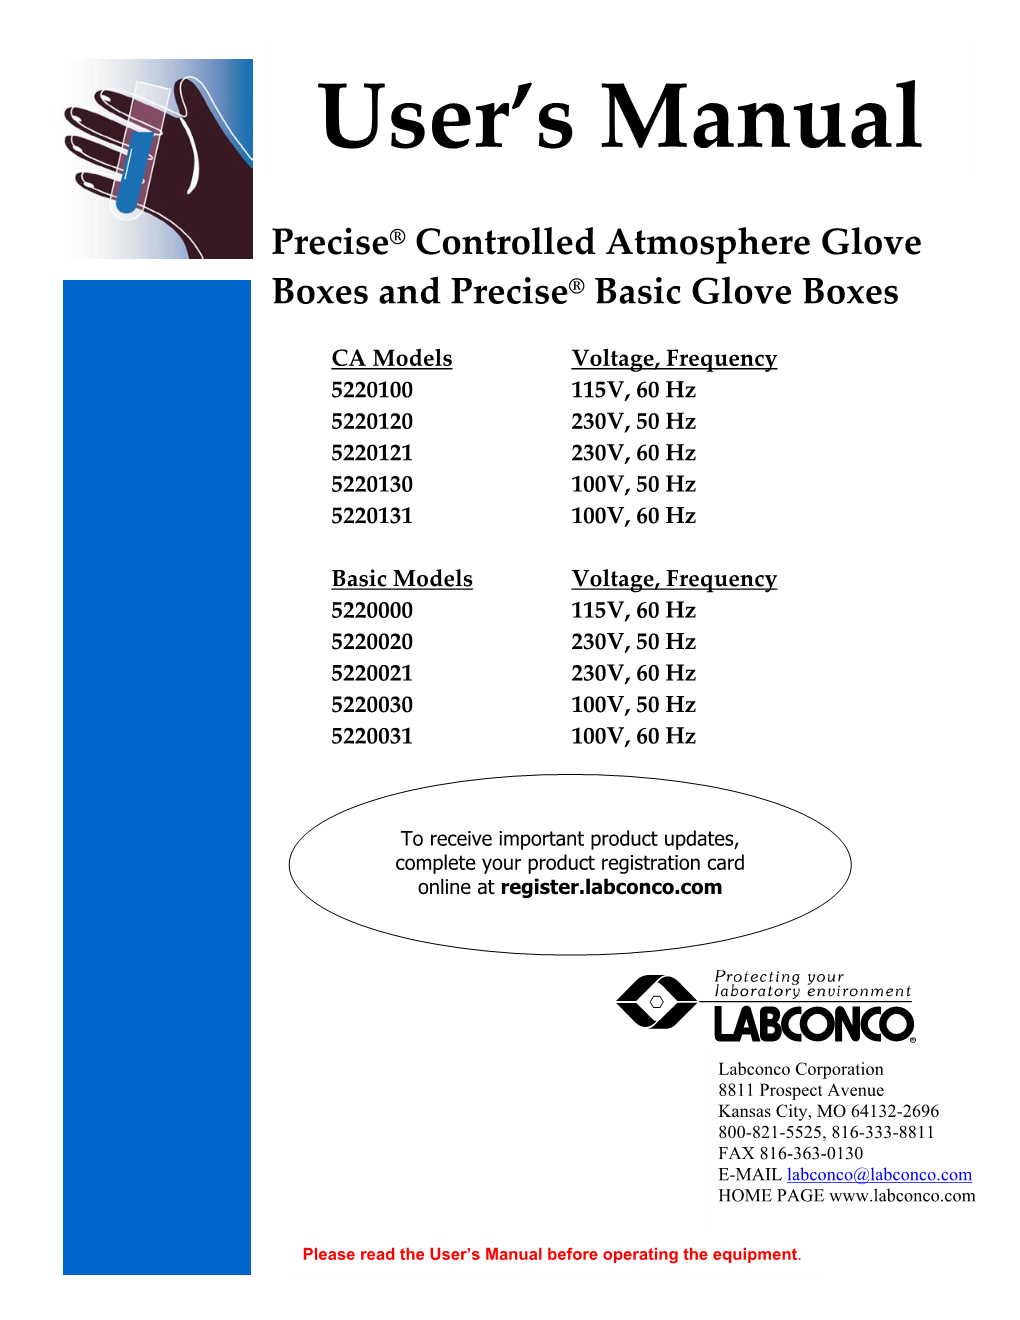 Precise Controlled Atmosphere and Basic Glove Boxes User's Manual